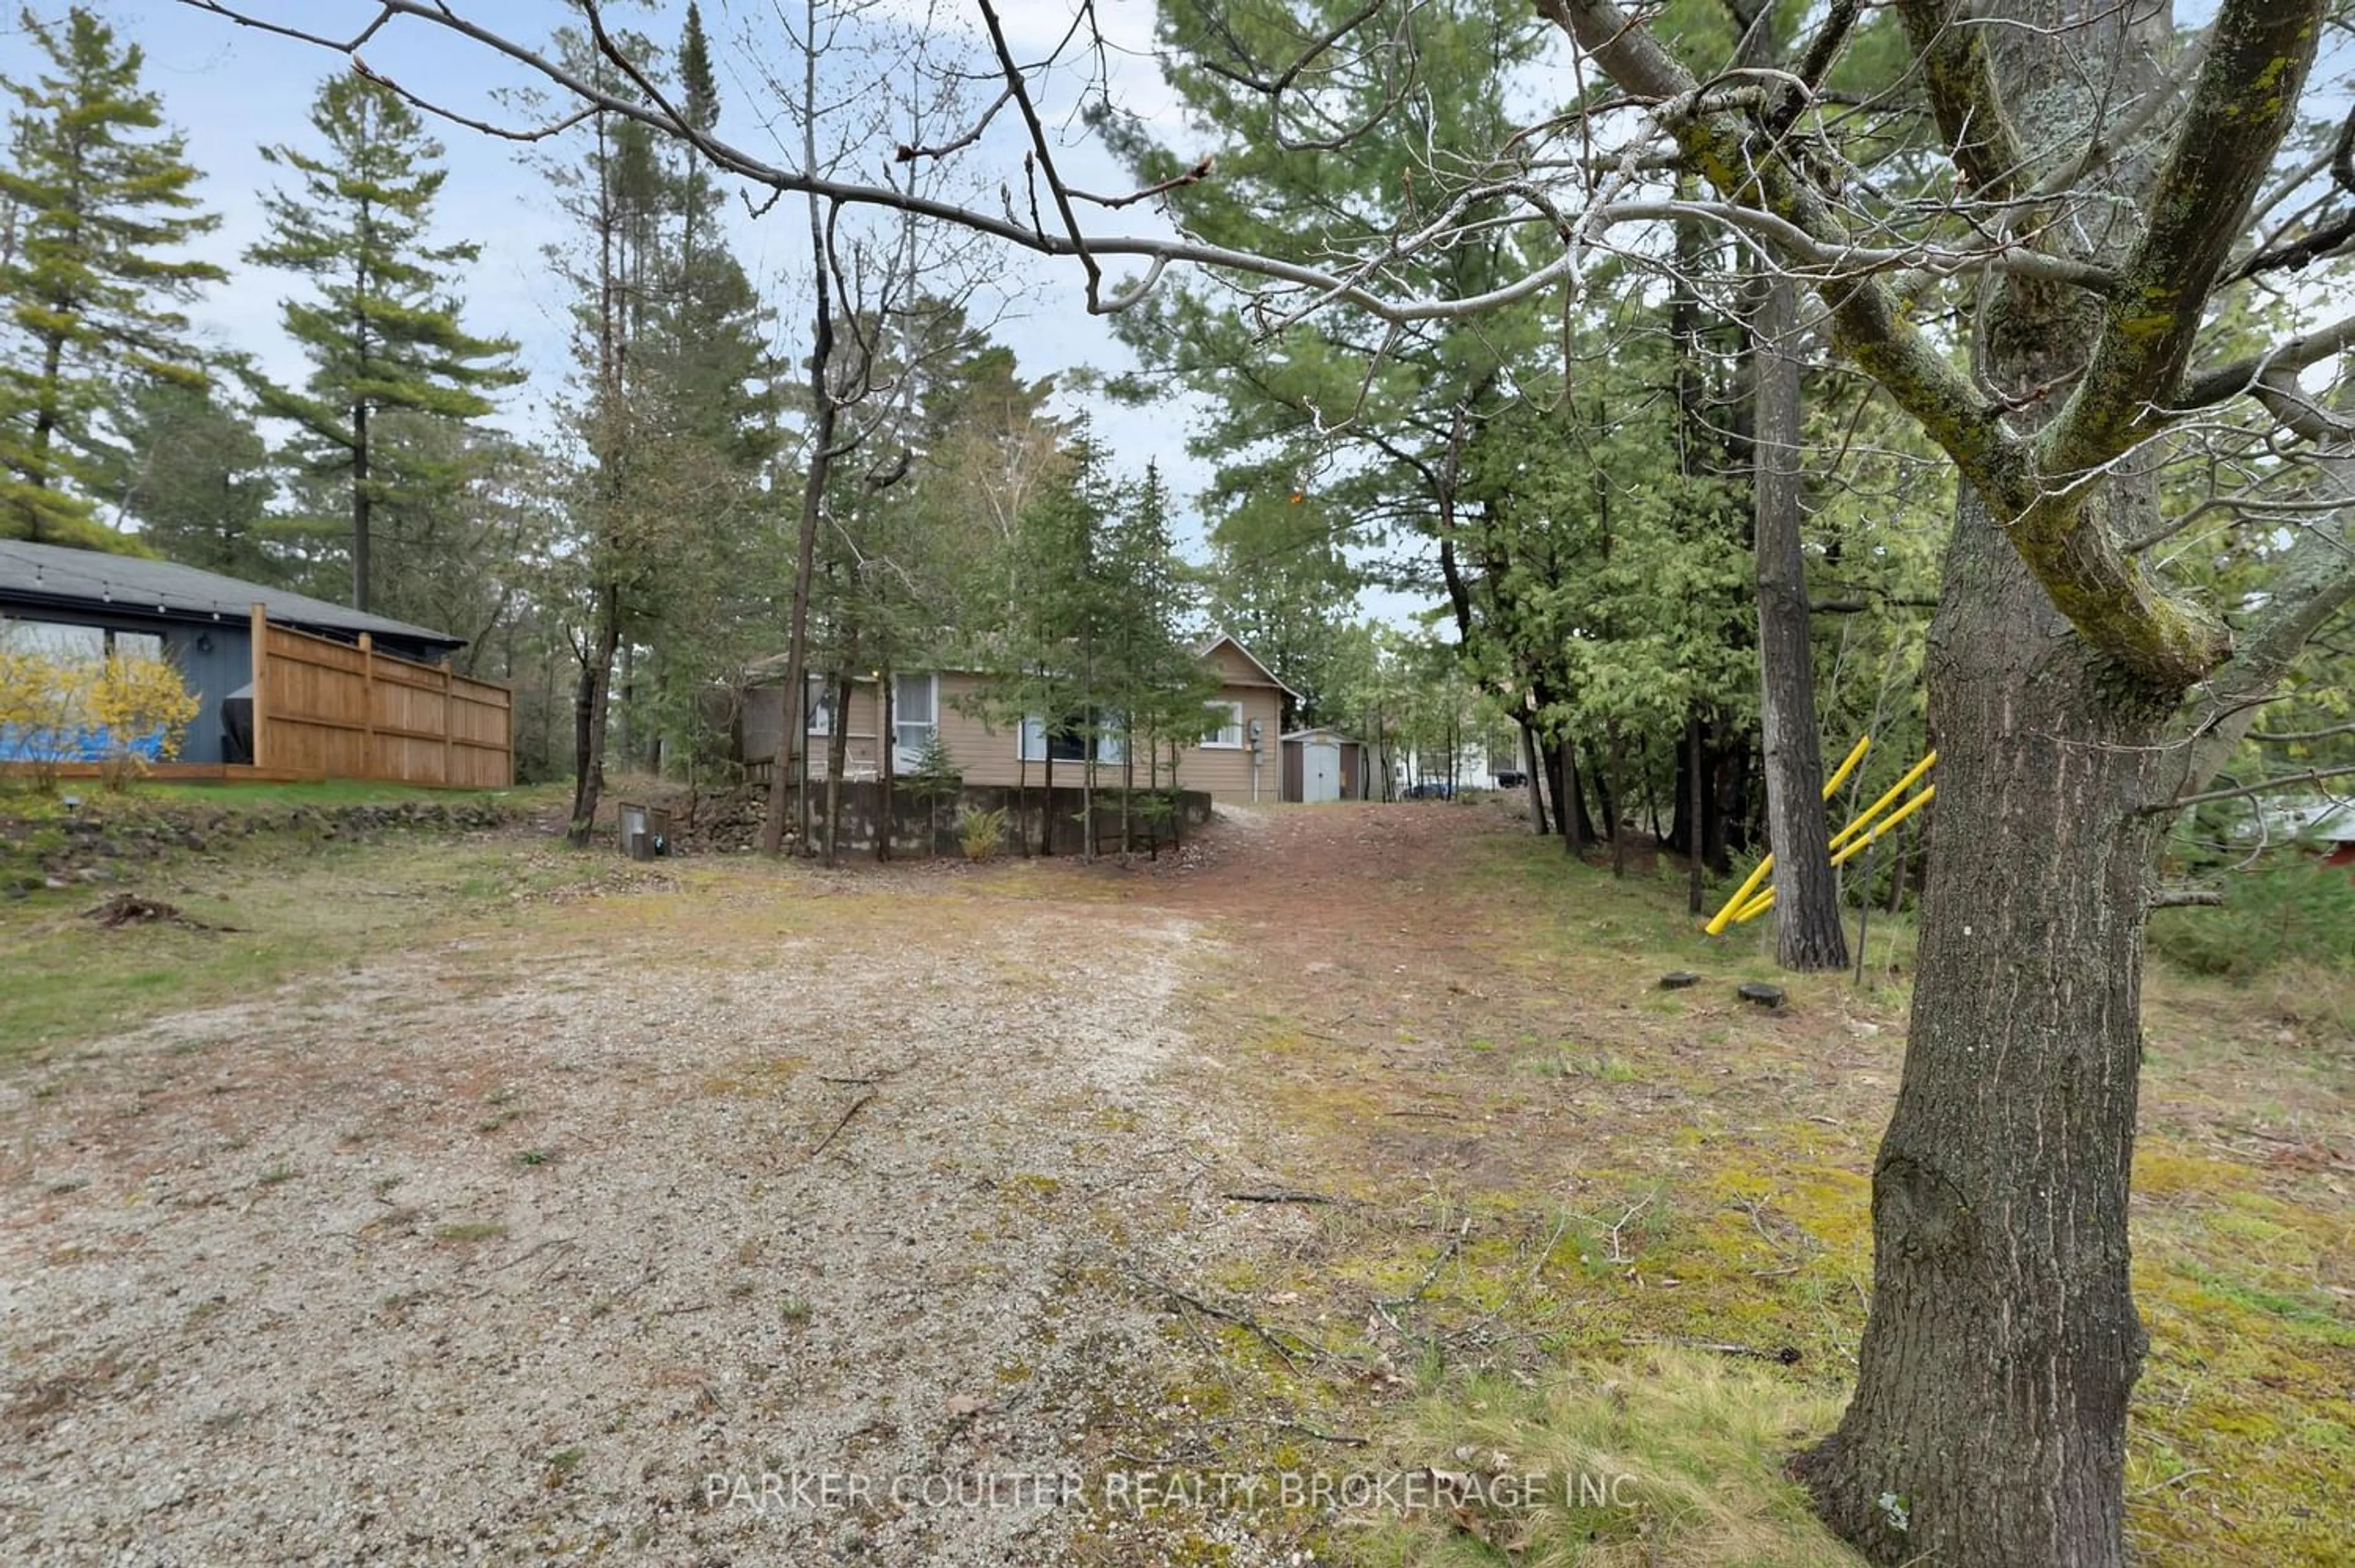 Outside view for 1221 River Rd, Wasaga Beach Ontario L9Z 2R7